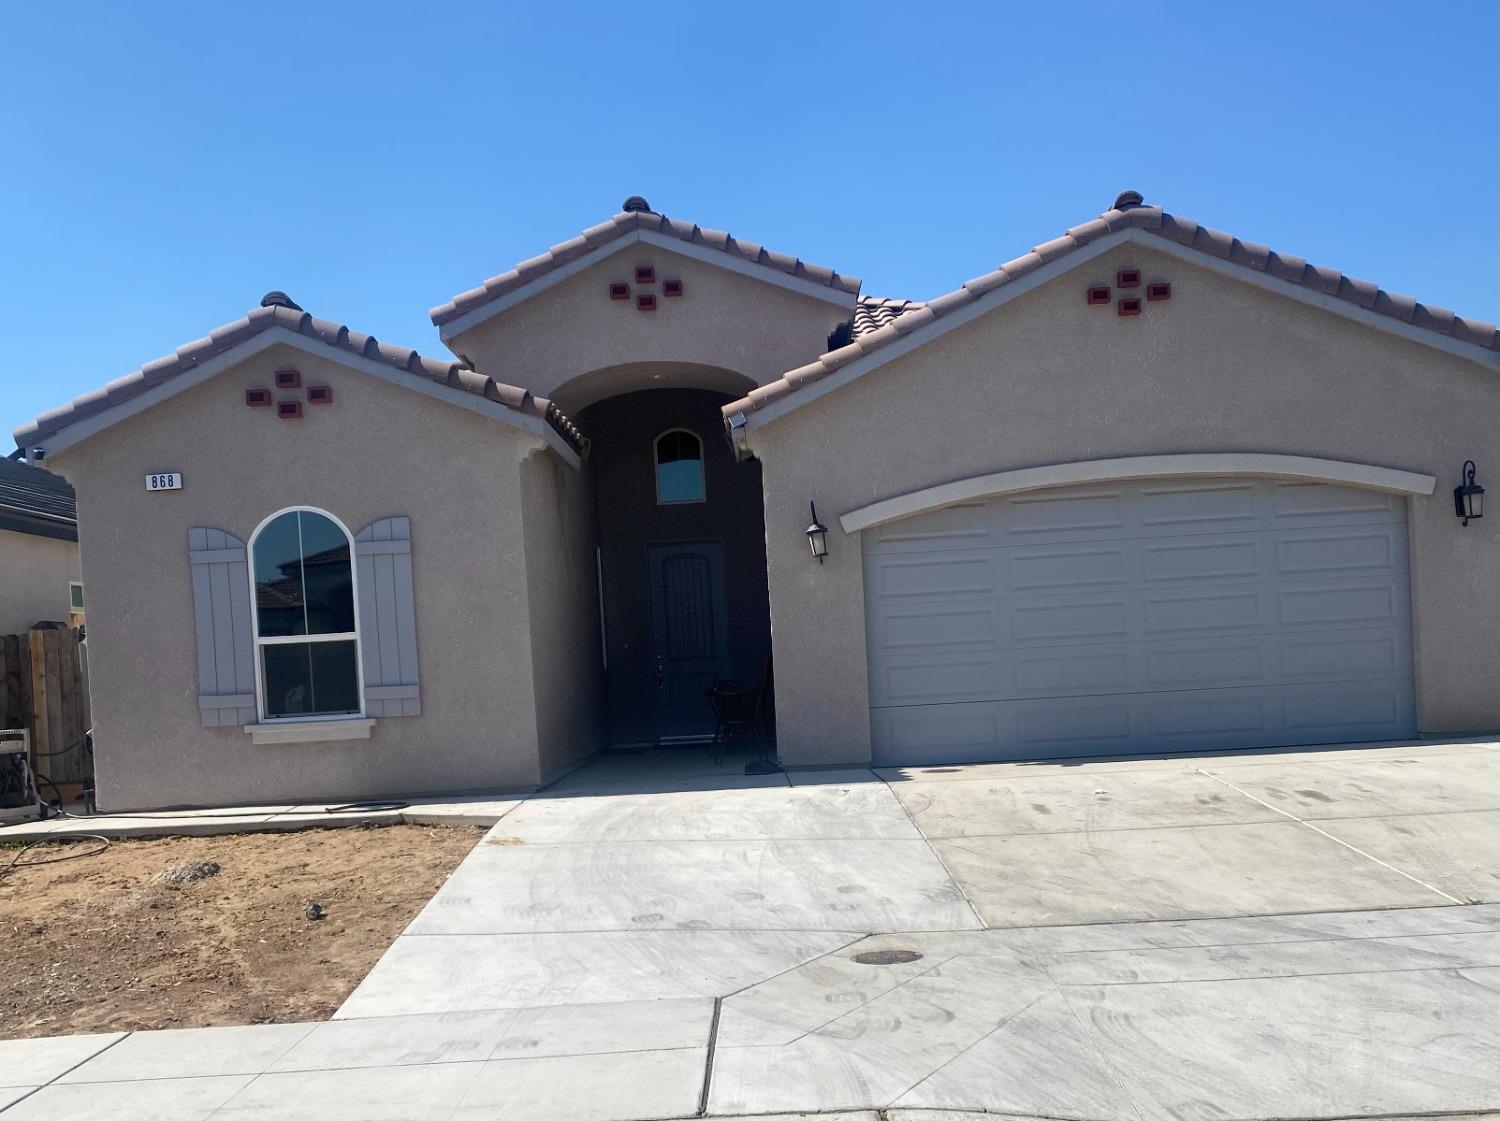 Photo of 868 Rubicon Ave in Madera, CA